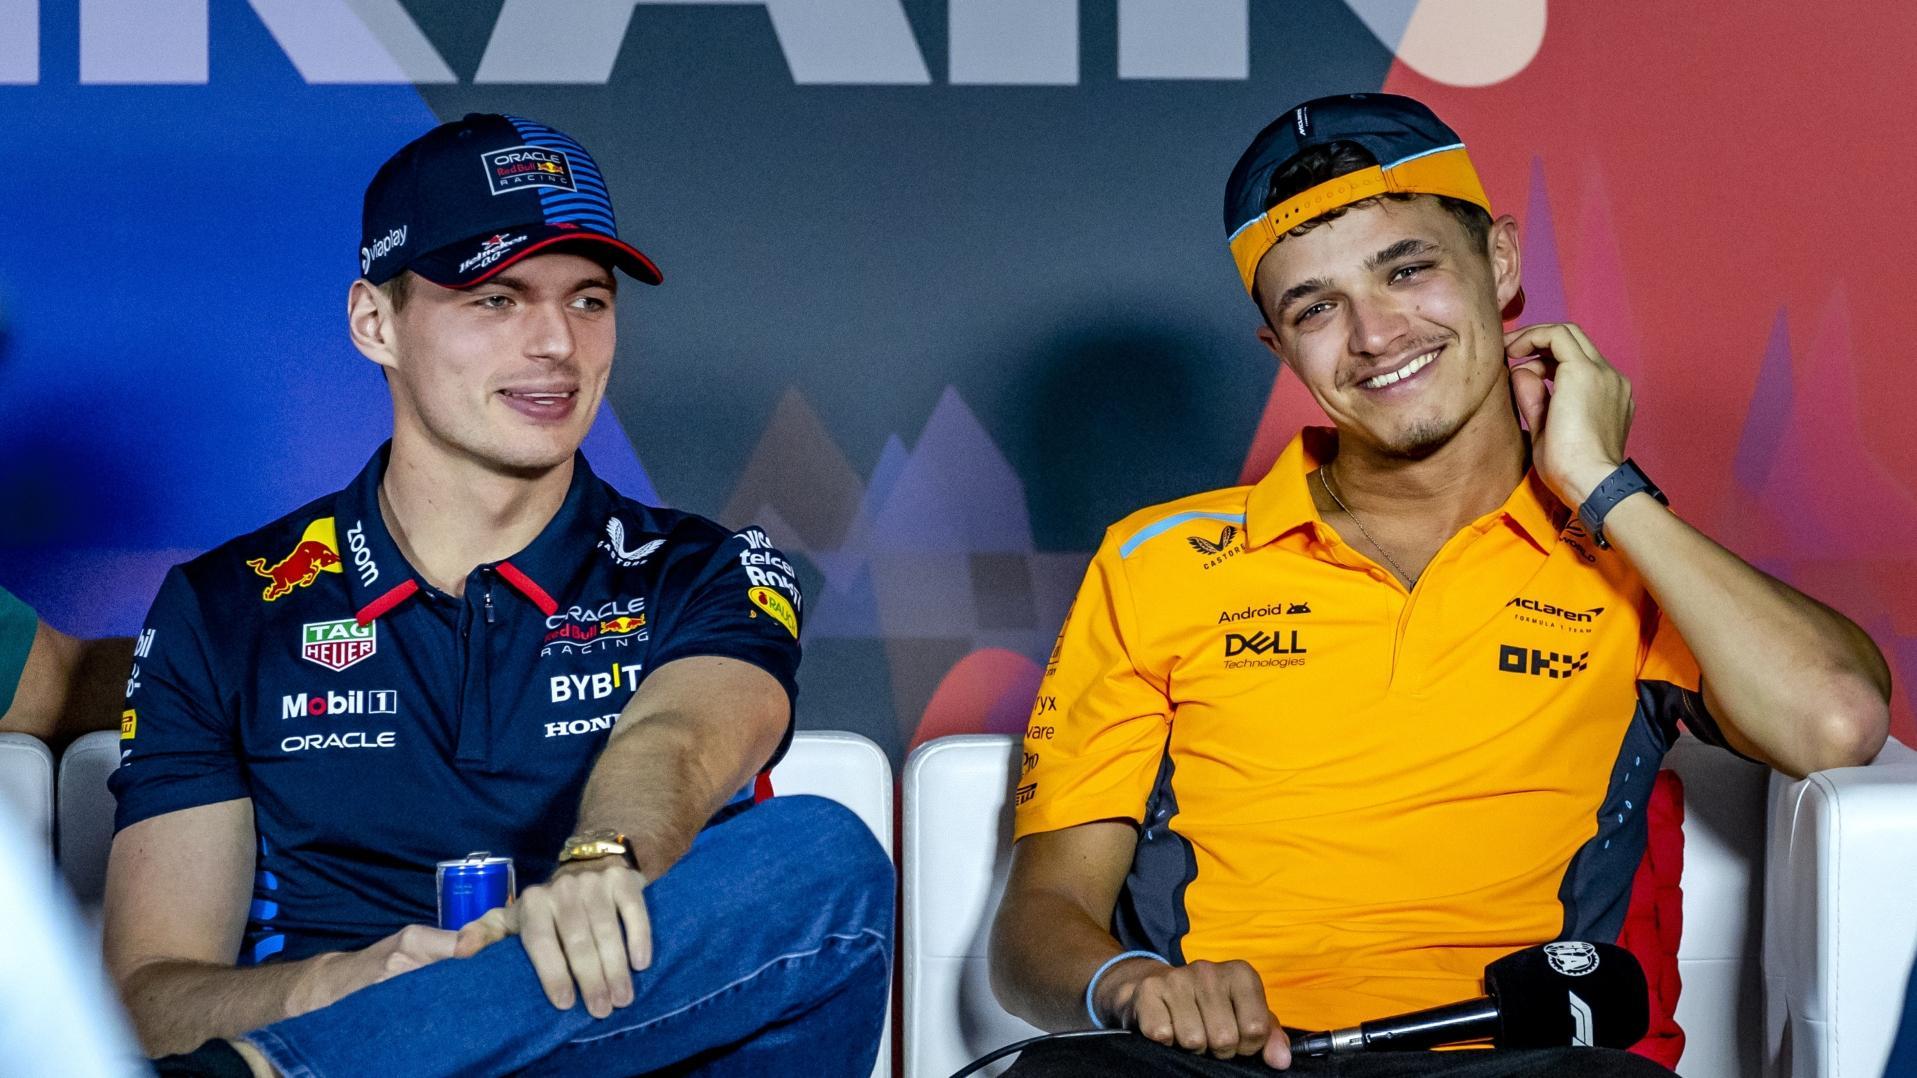 Is Verstappen's dominance overshadowing the talent of other drivers?